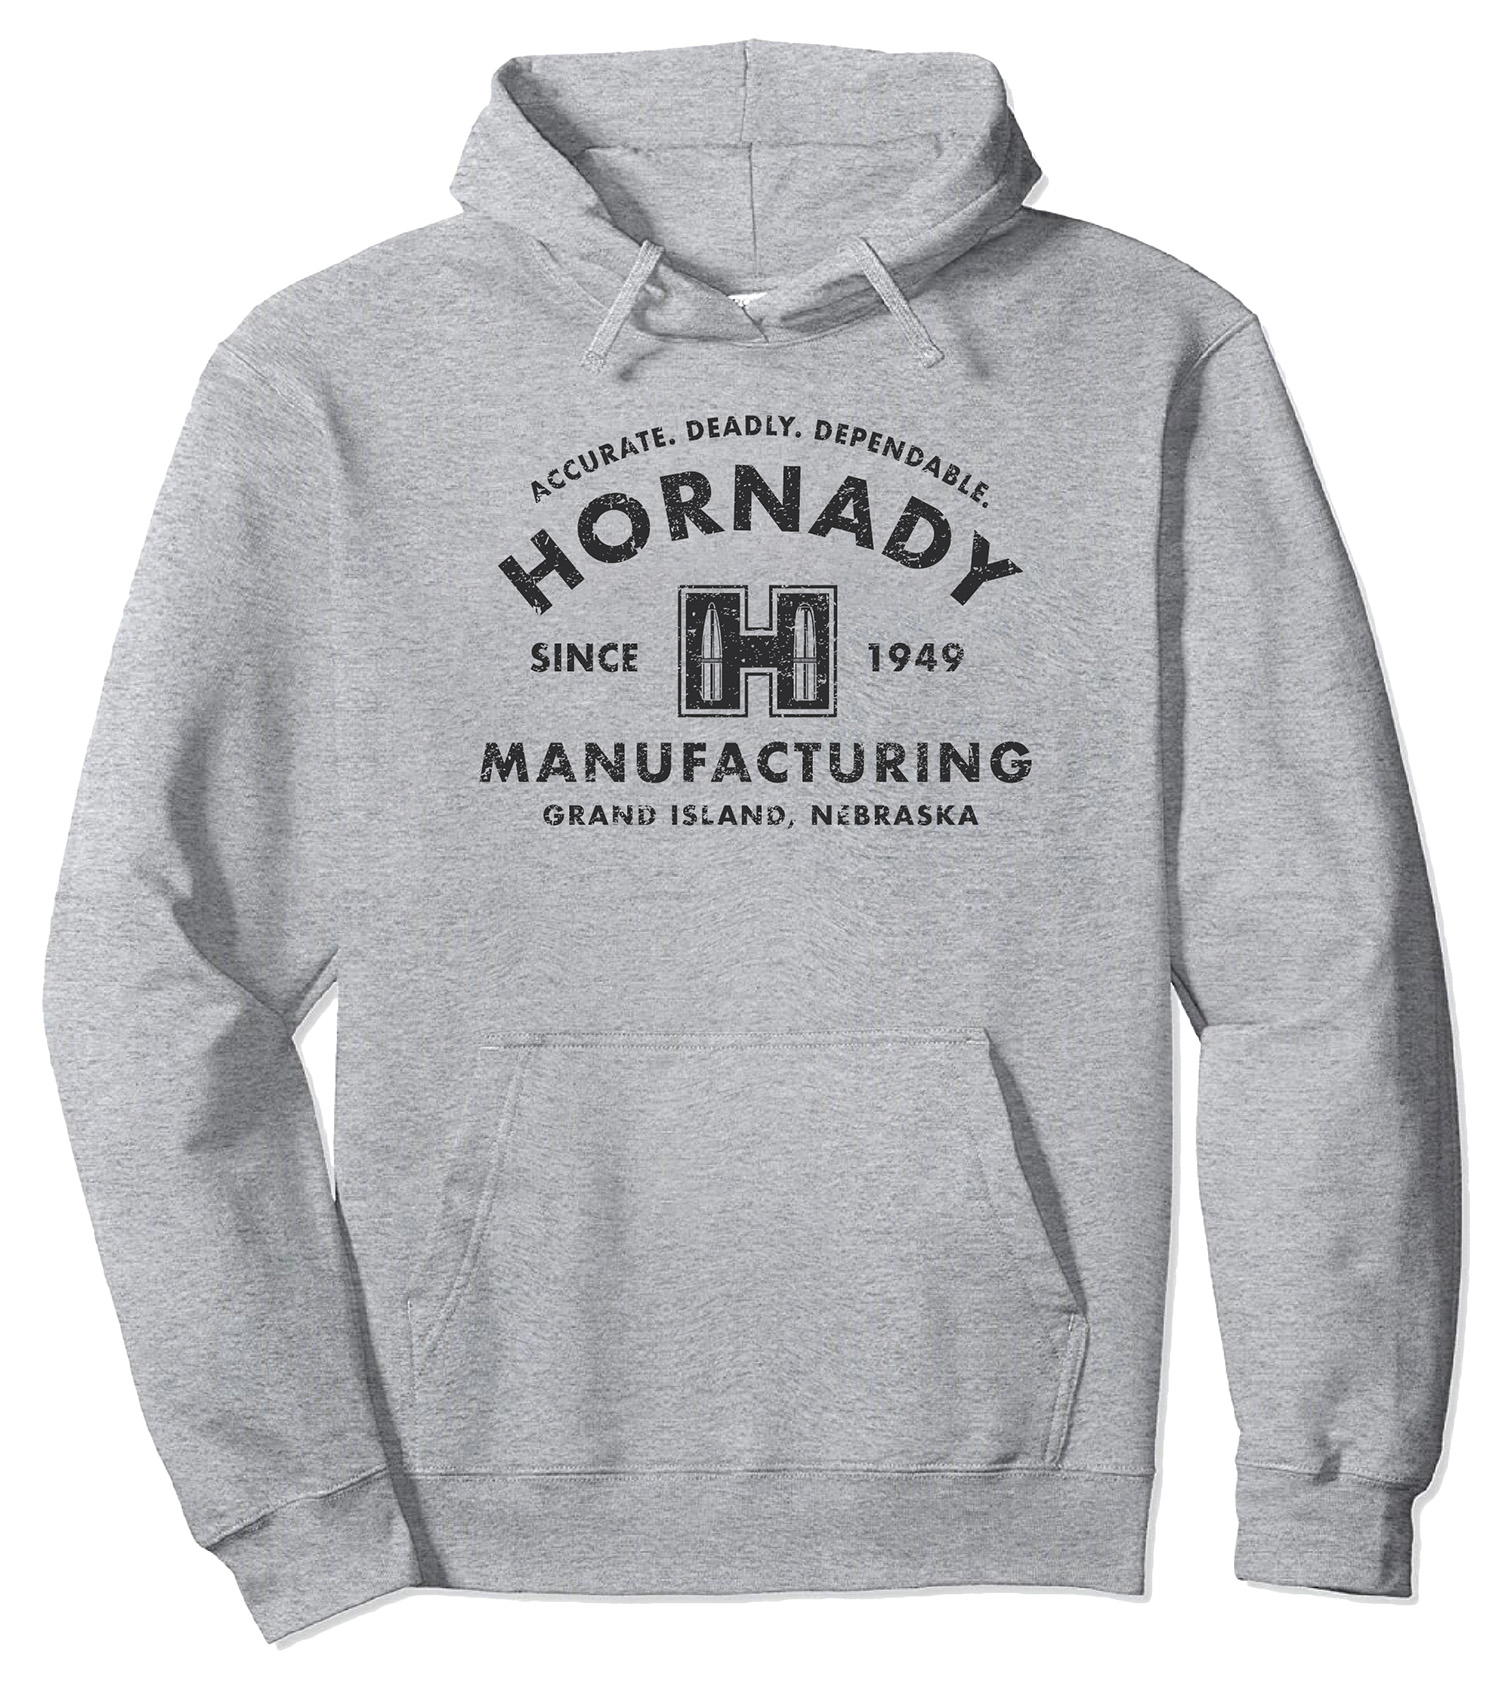 Hornady 99598XL Accurate, Deadly, Dependable  Gray Long Sleeve XL